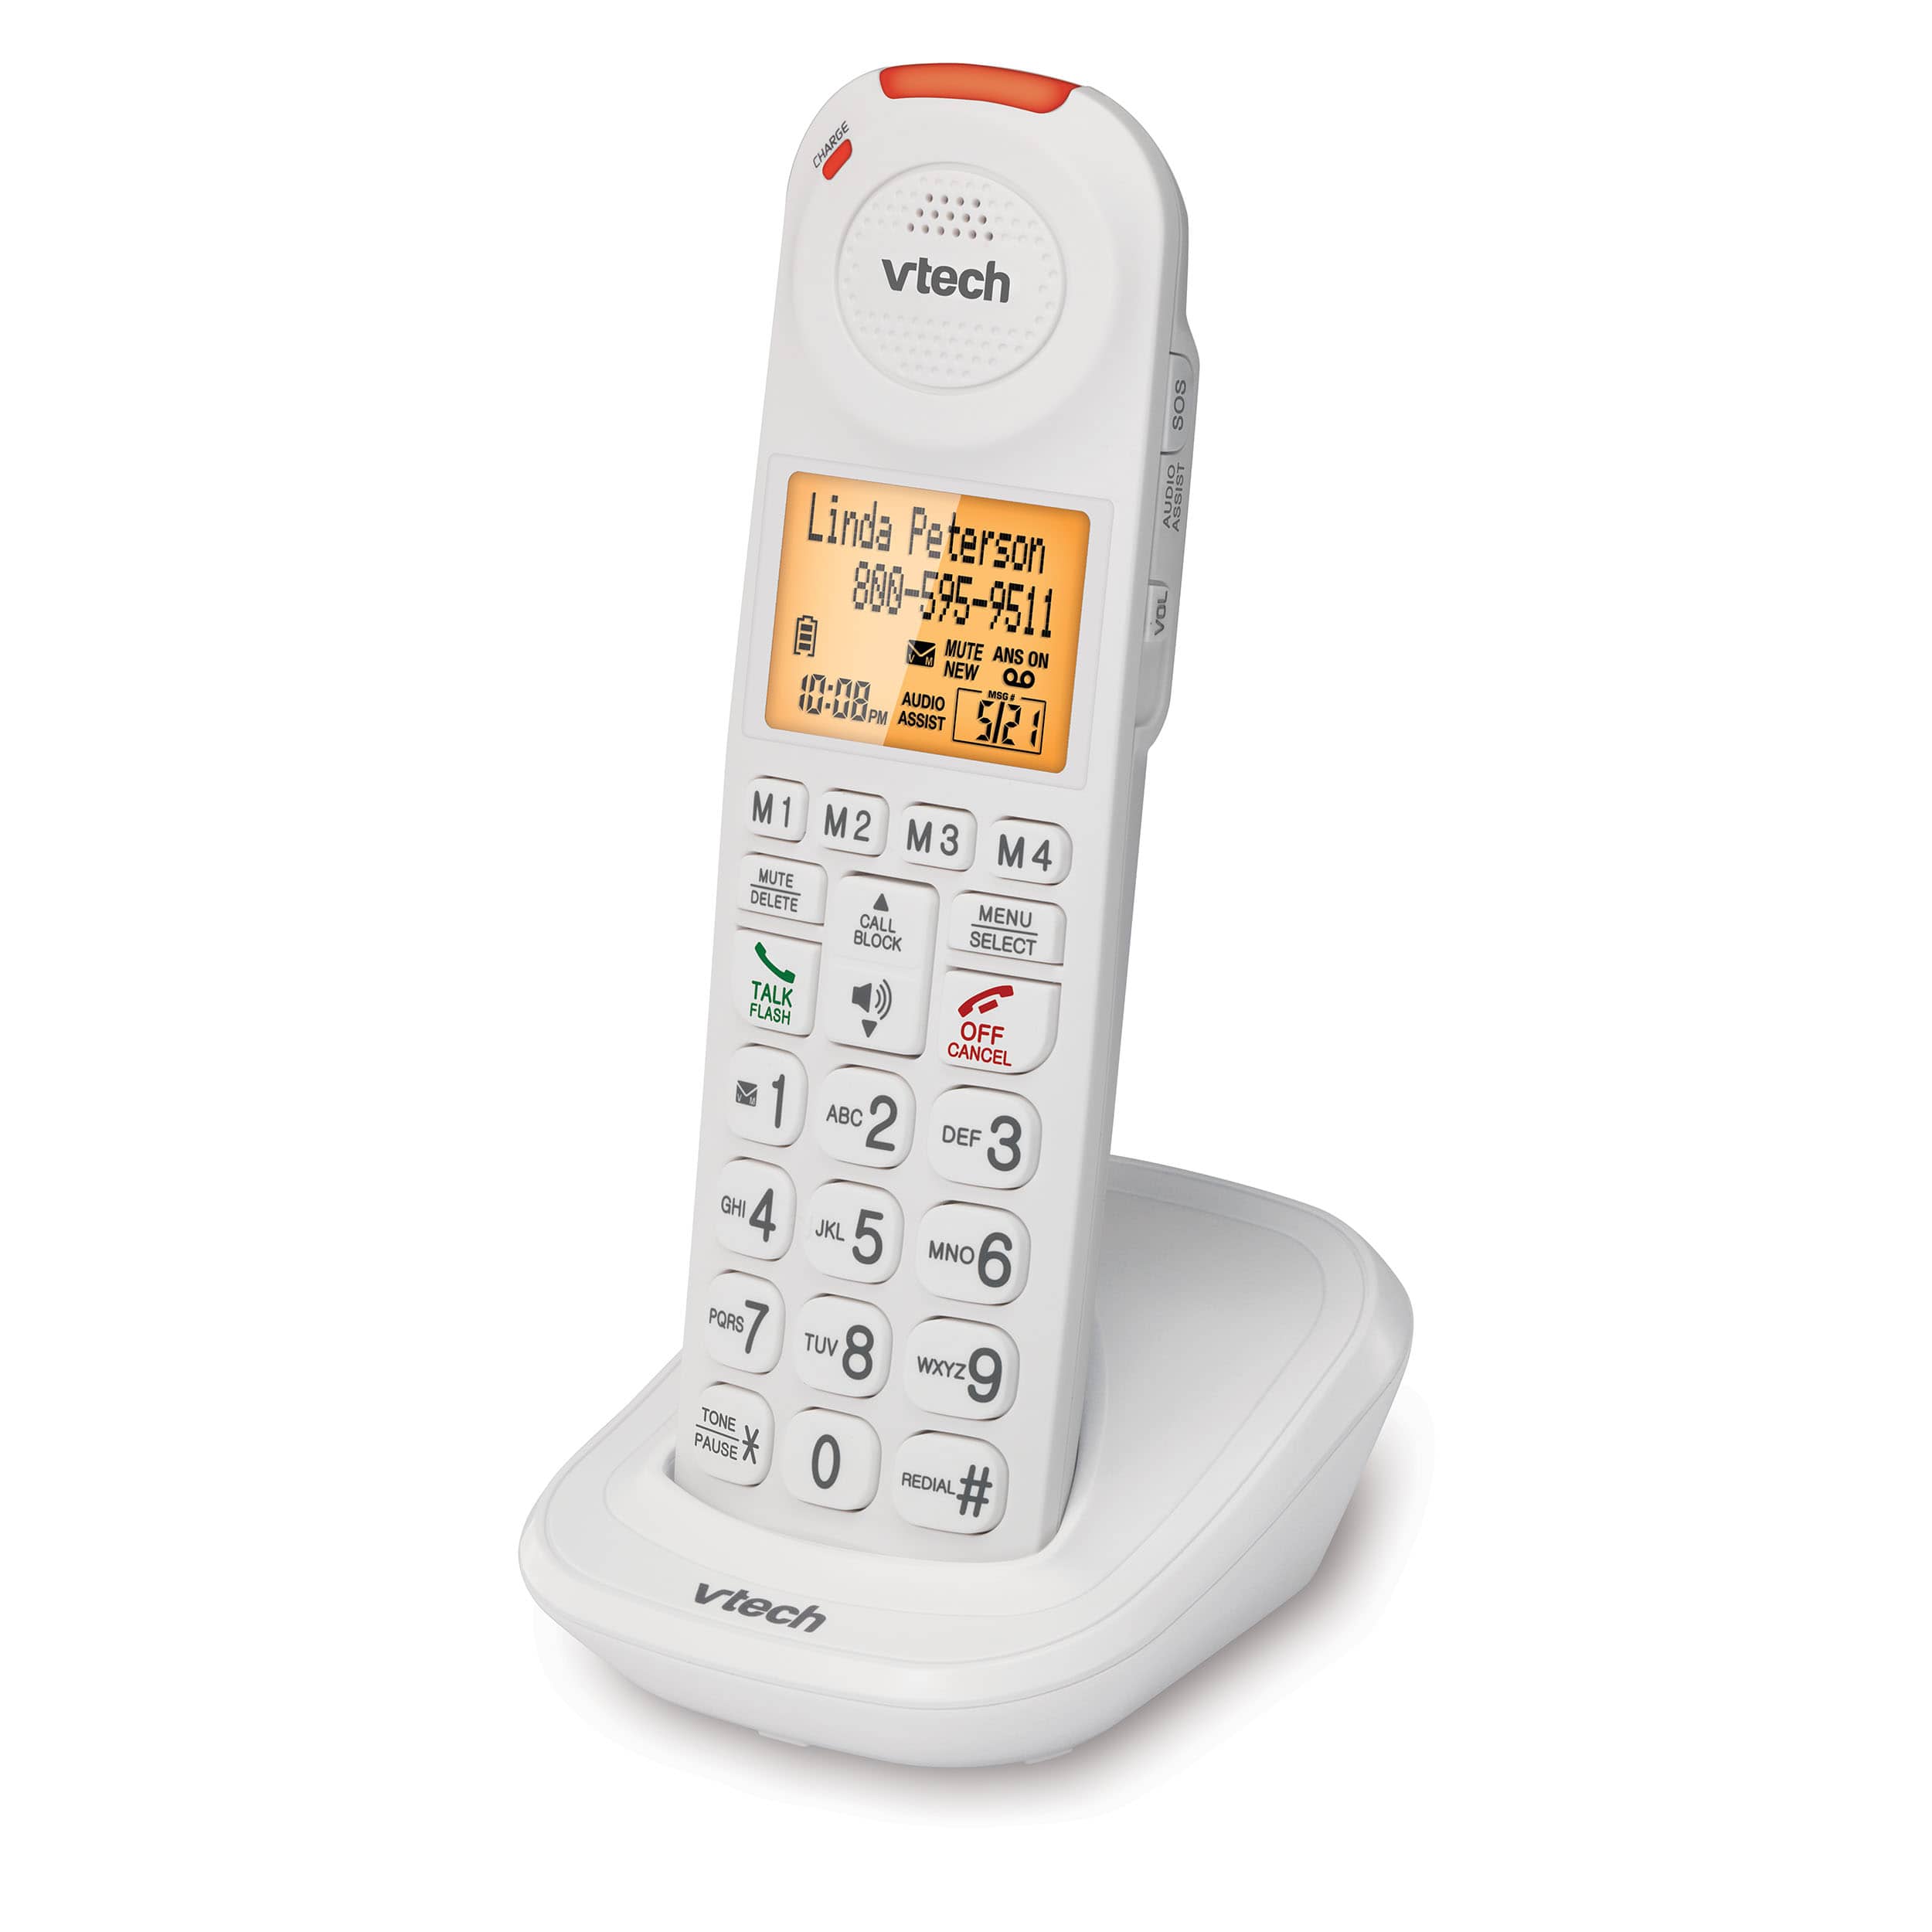 3 Handset Amplified Cordless Answering System with Big Buttons and Display - view 4